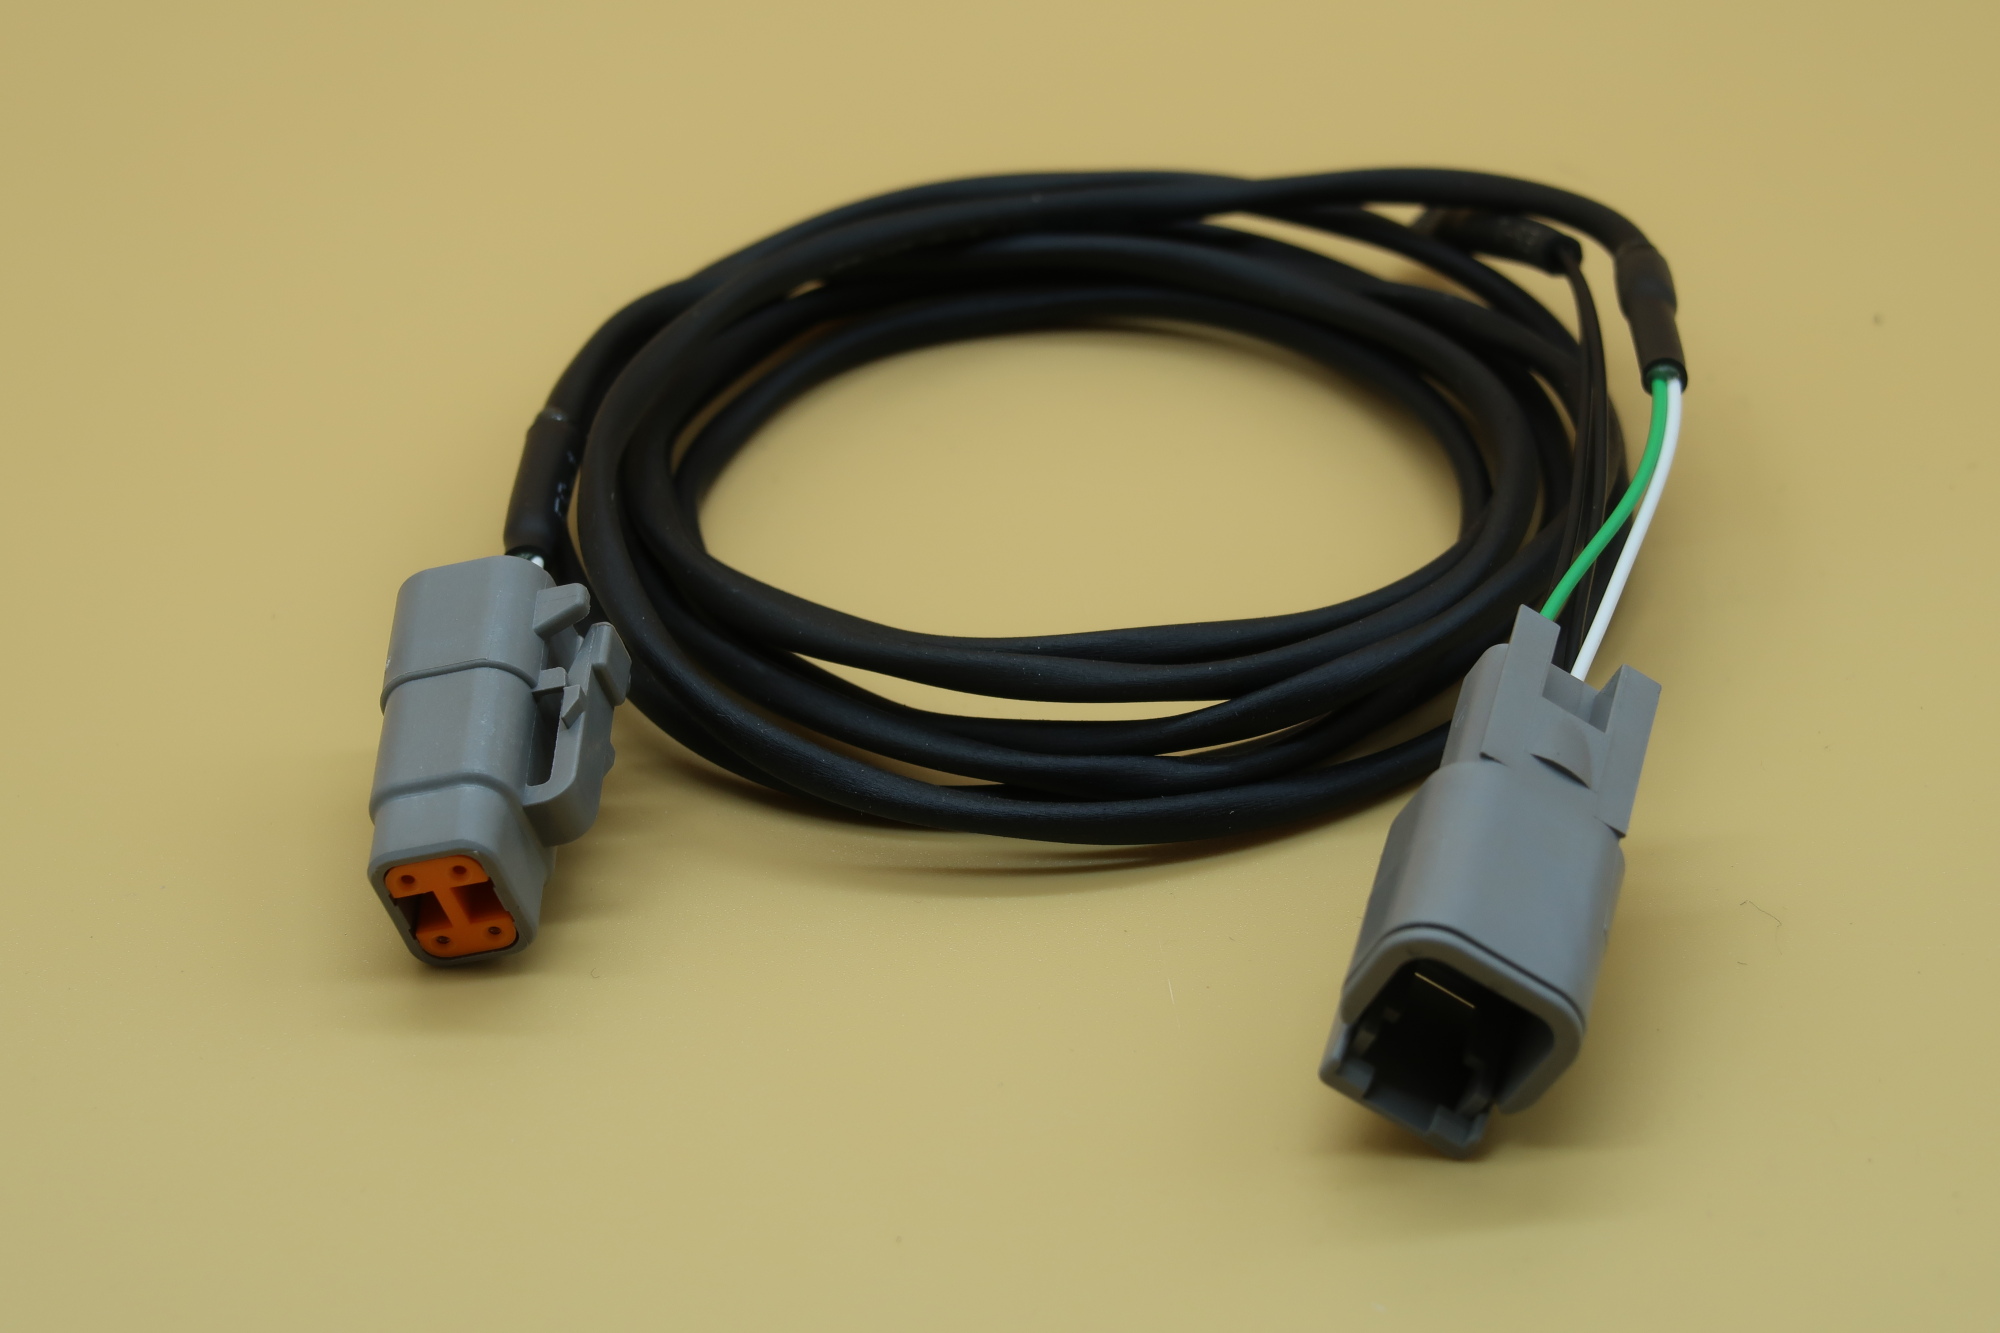 C125-M130 COMMS CABLE